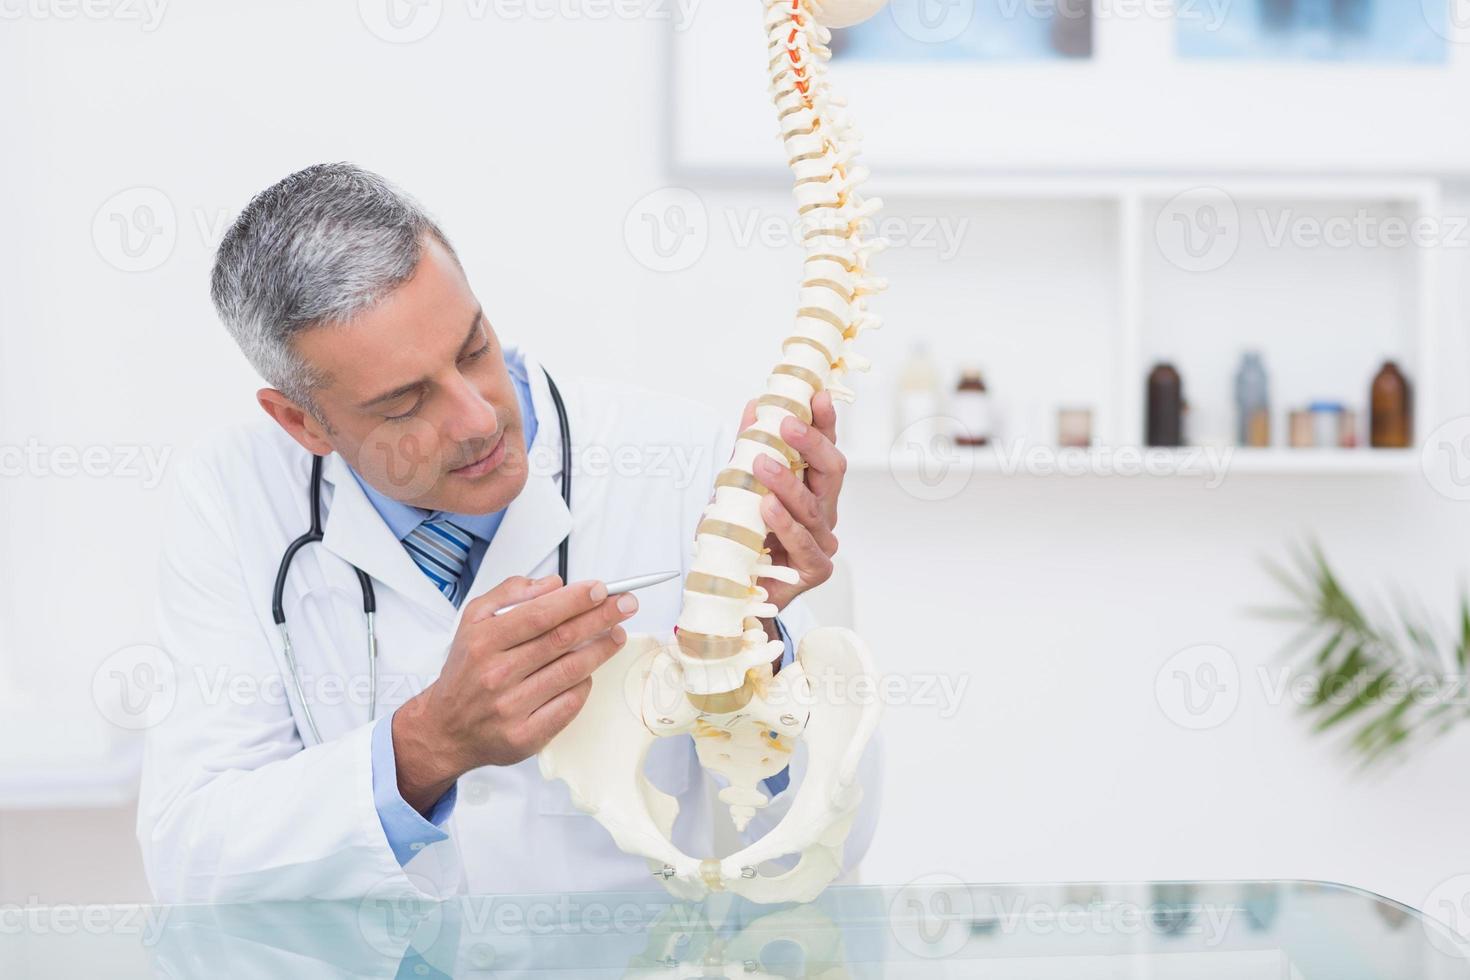 Spinal health